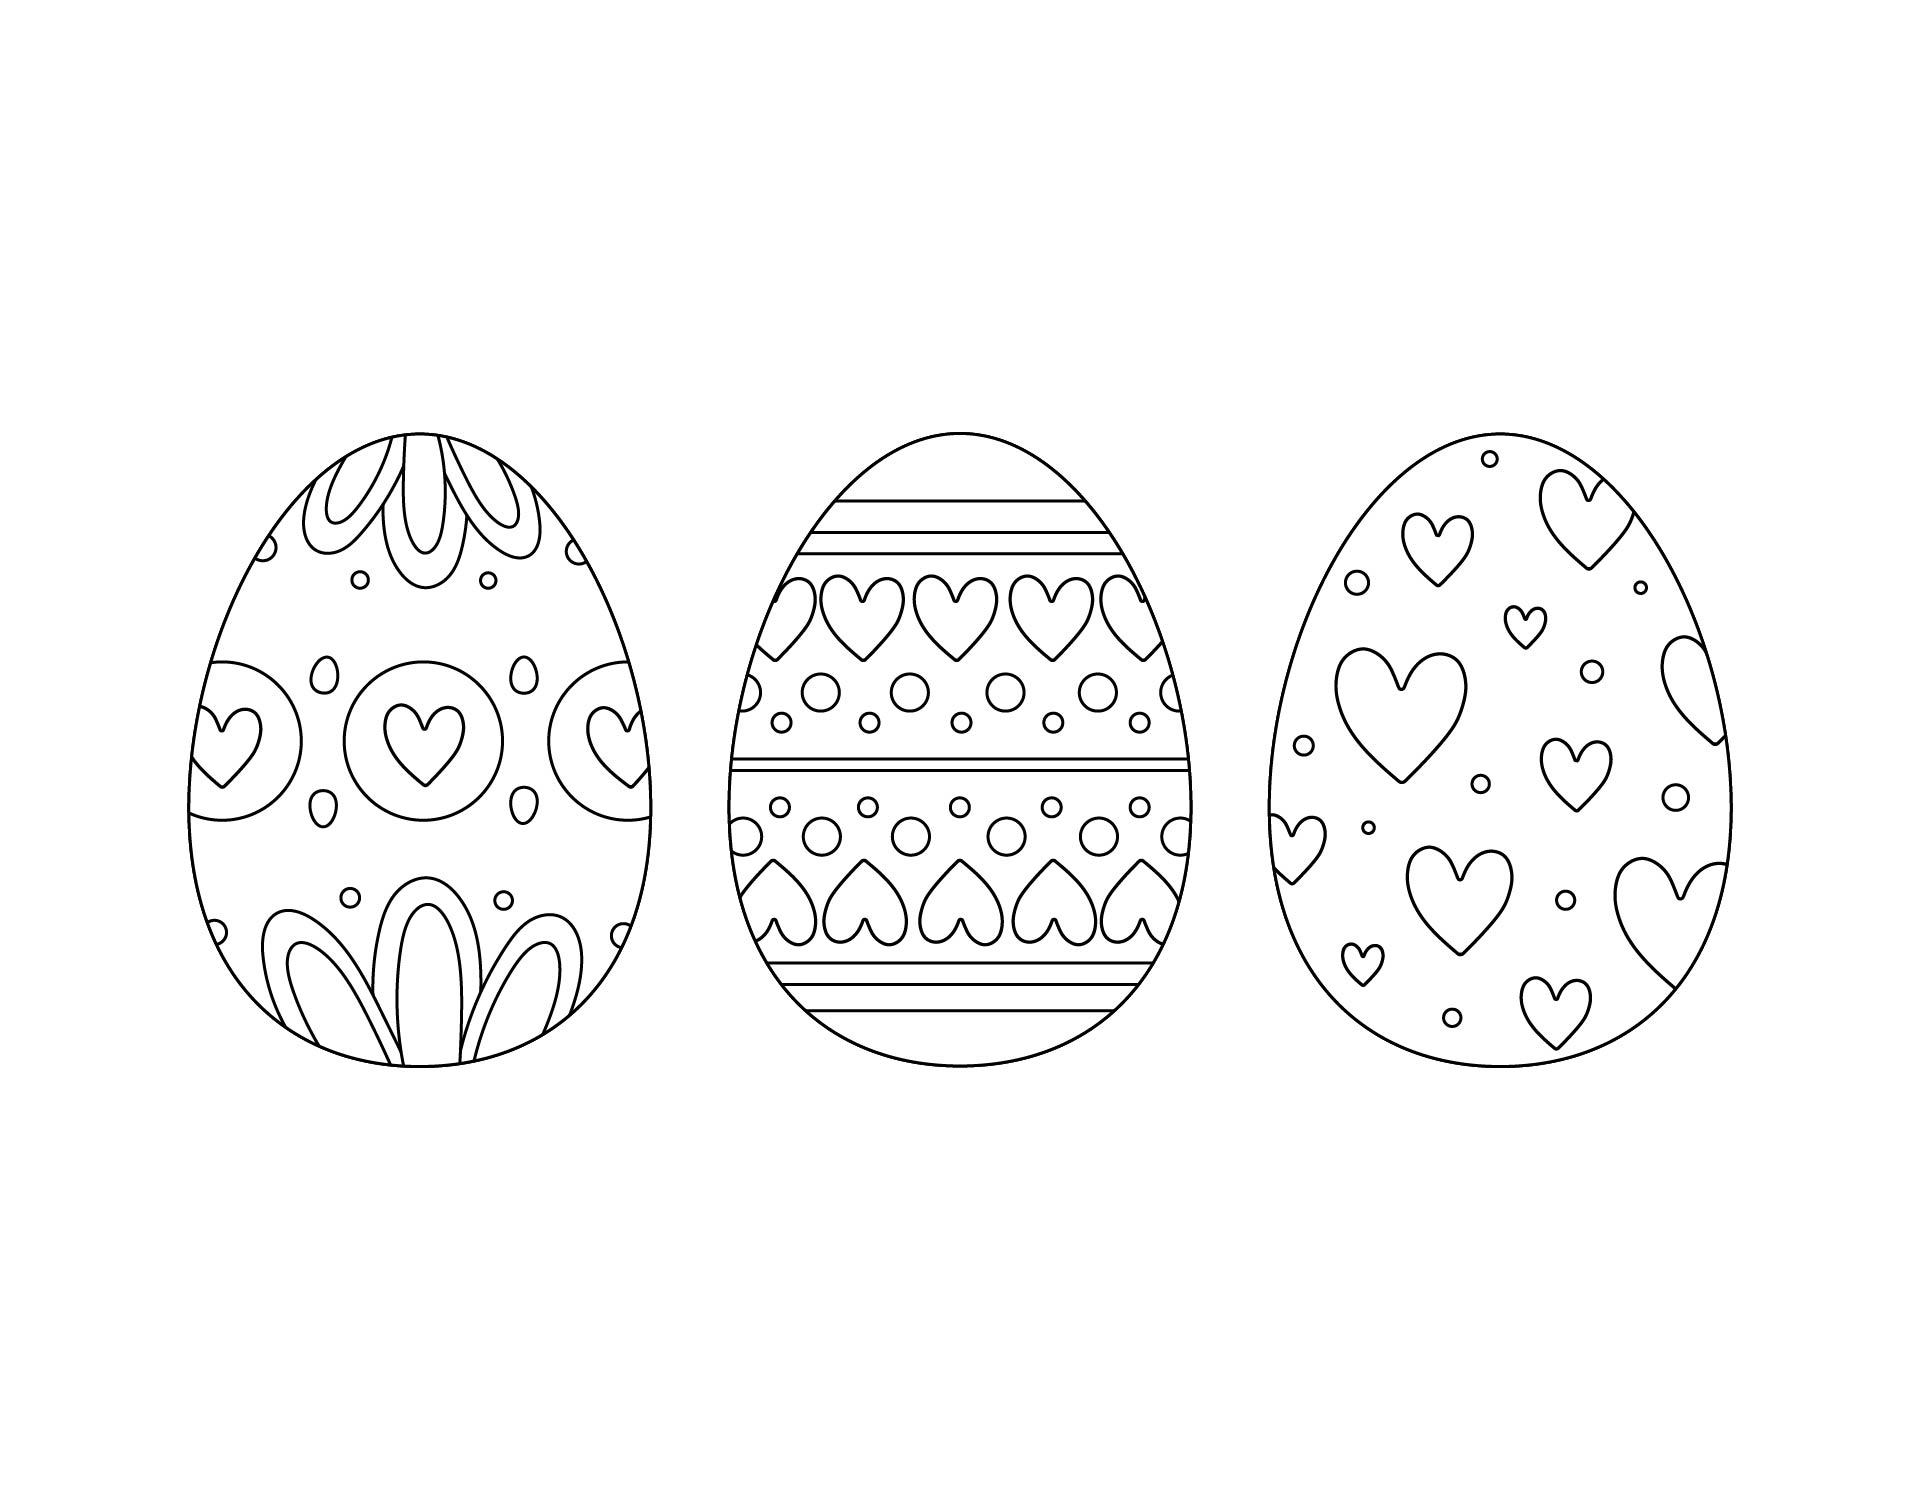 Free Printable Easter Crafts